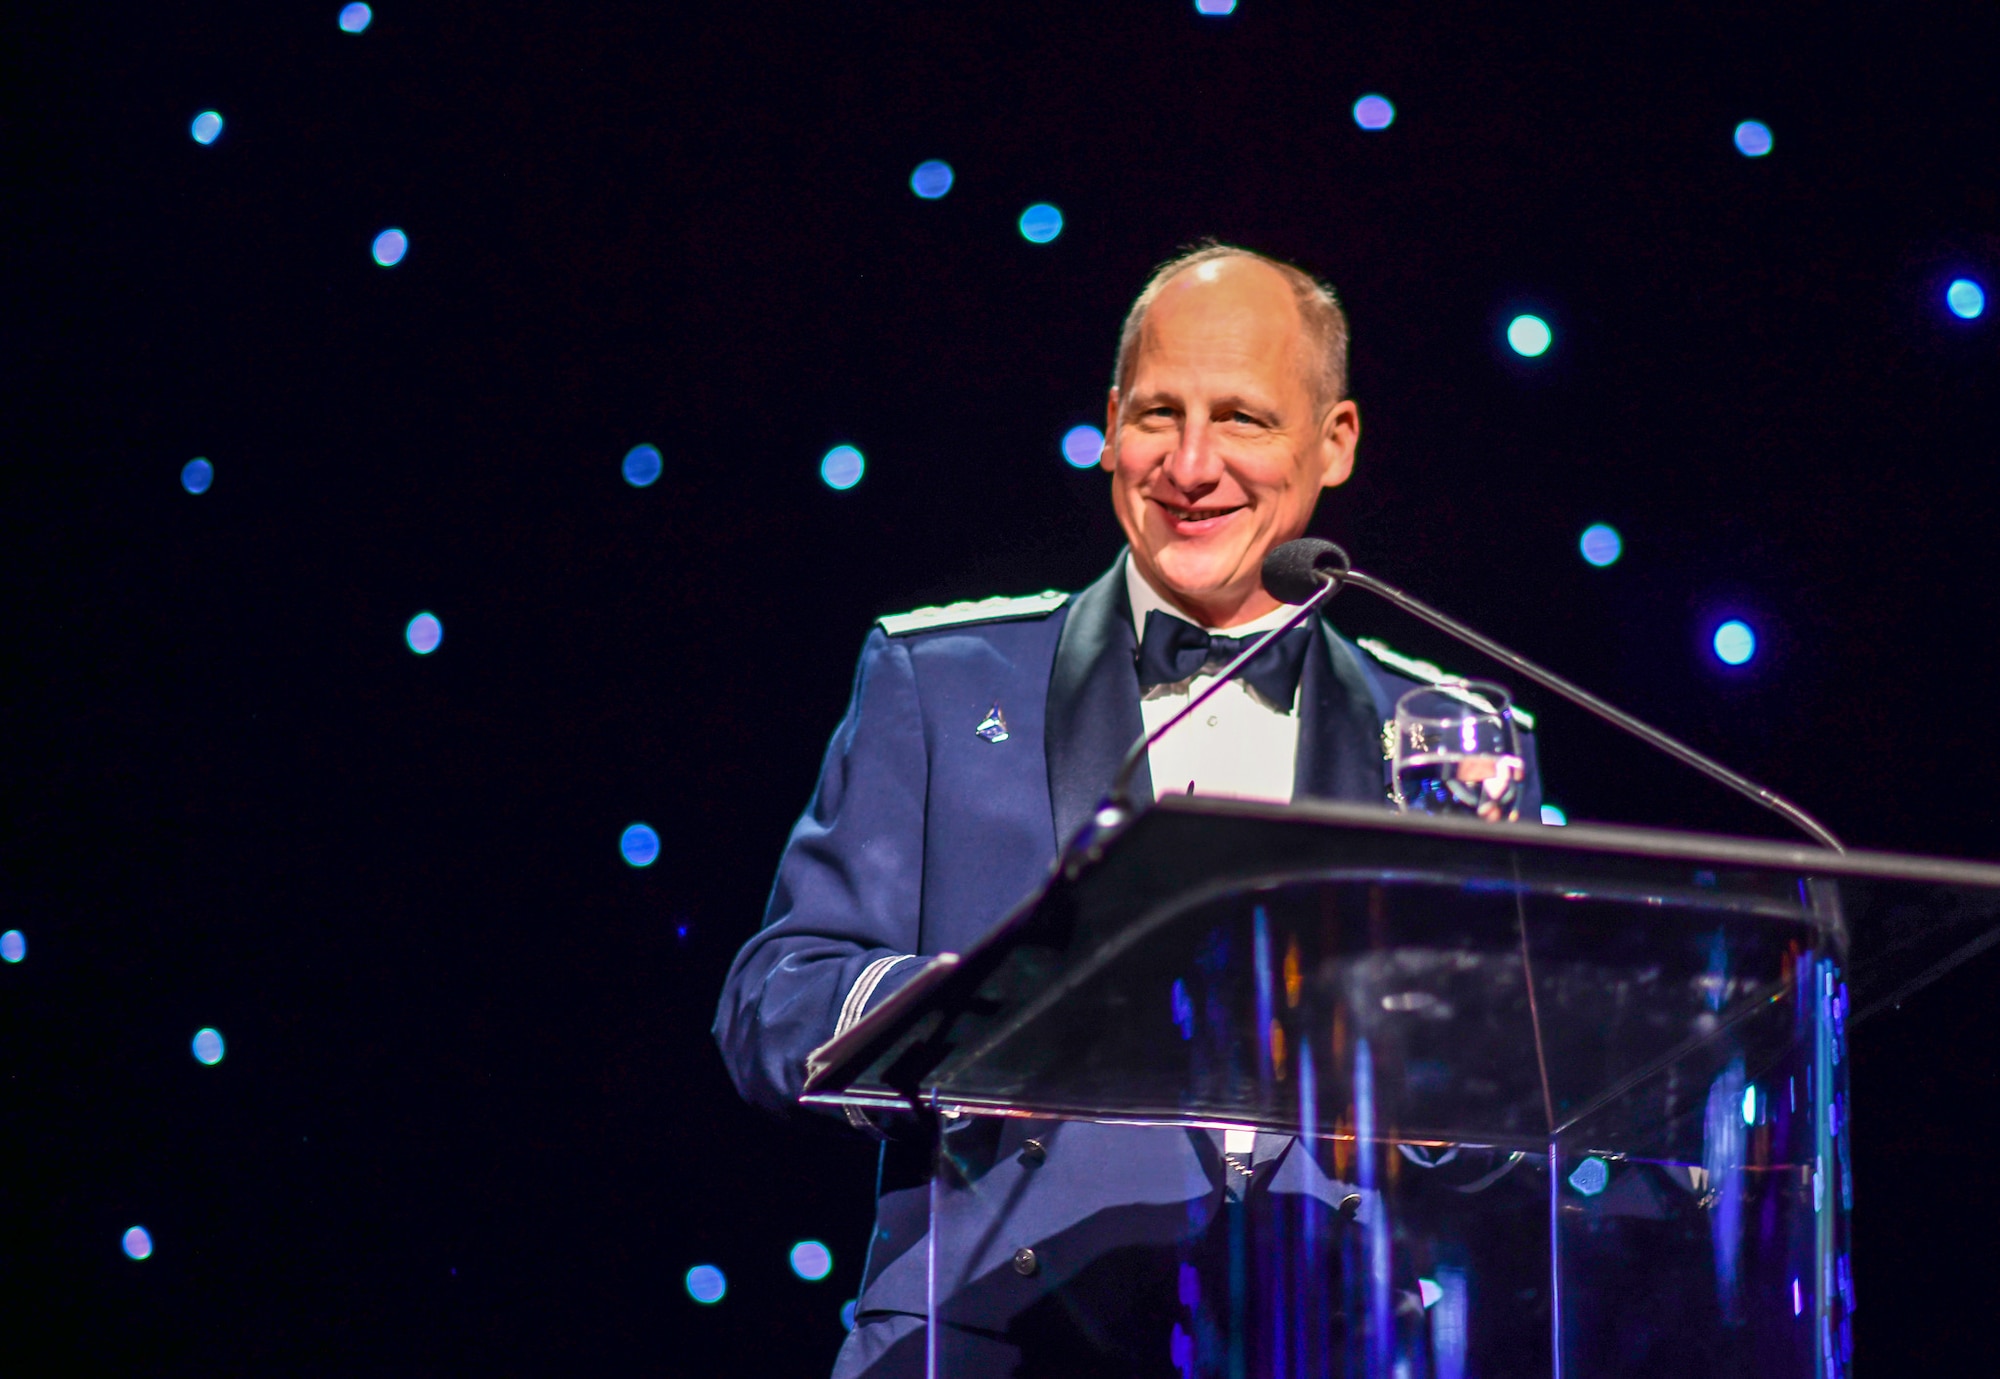 Lt. Gen. Michael Guetlein, SSC commander congratulates the 2023 Space Systems Command Fight Tonight finalists at the Space Force Ball, Nov. 17 in Beverly Hills, Calif. (U.S. Space Force Photo by Van Ha